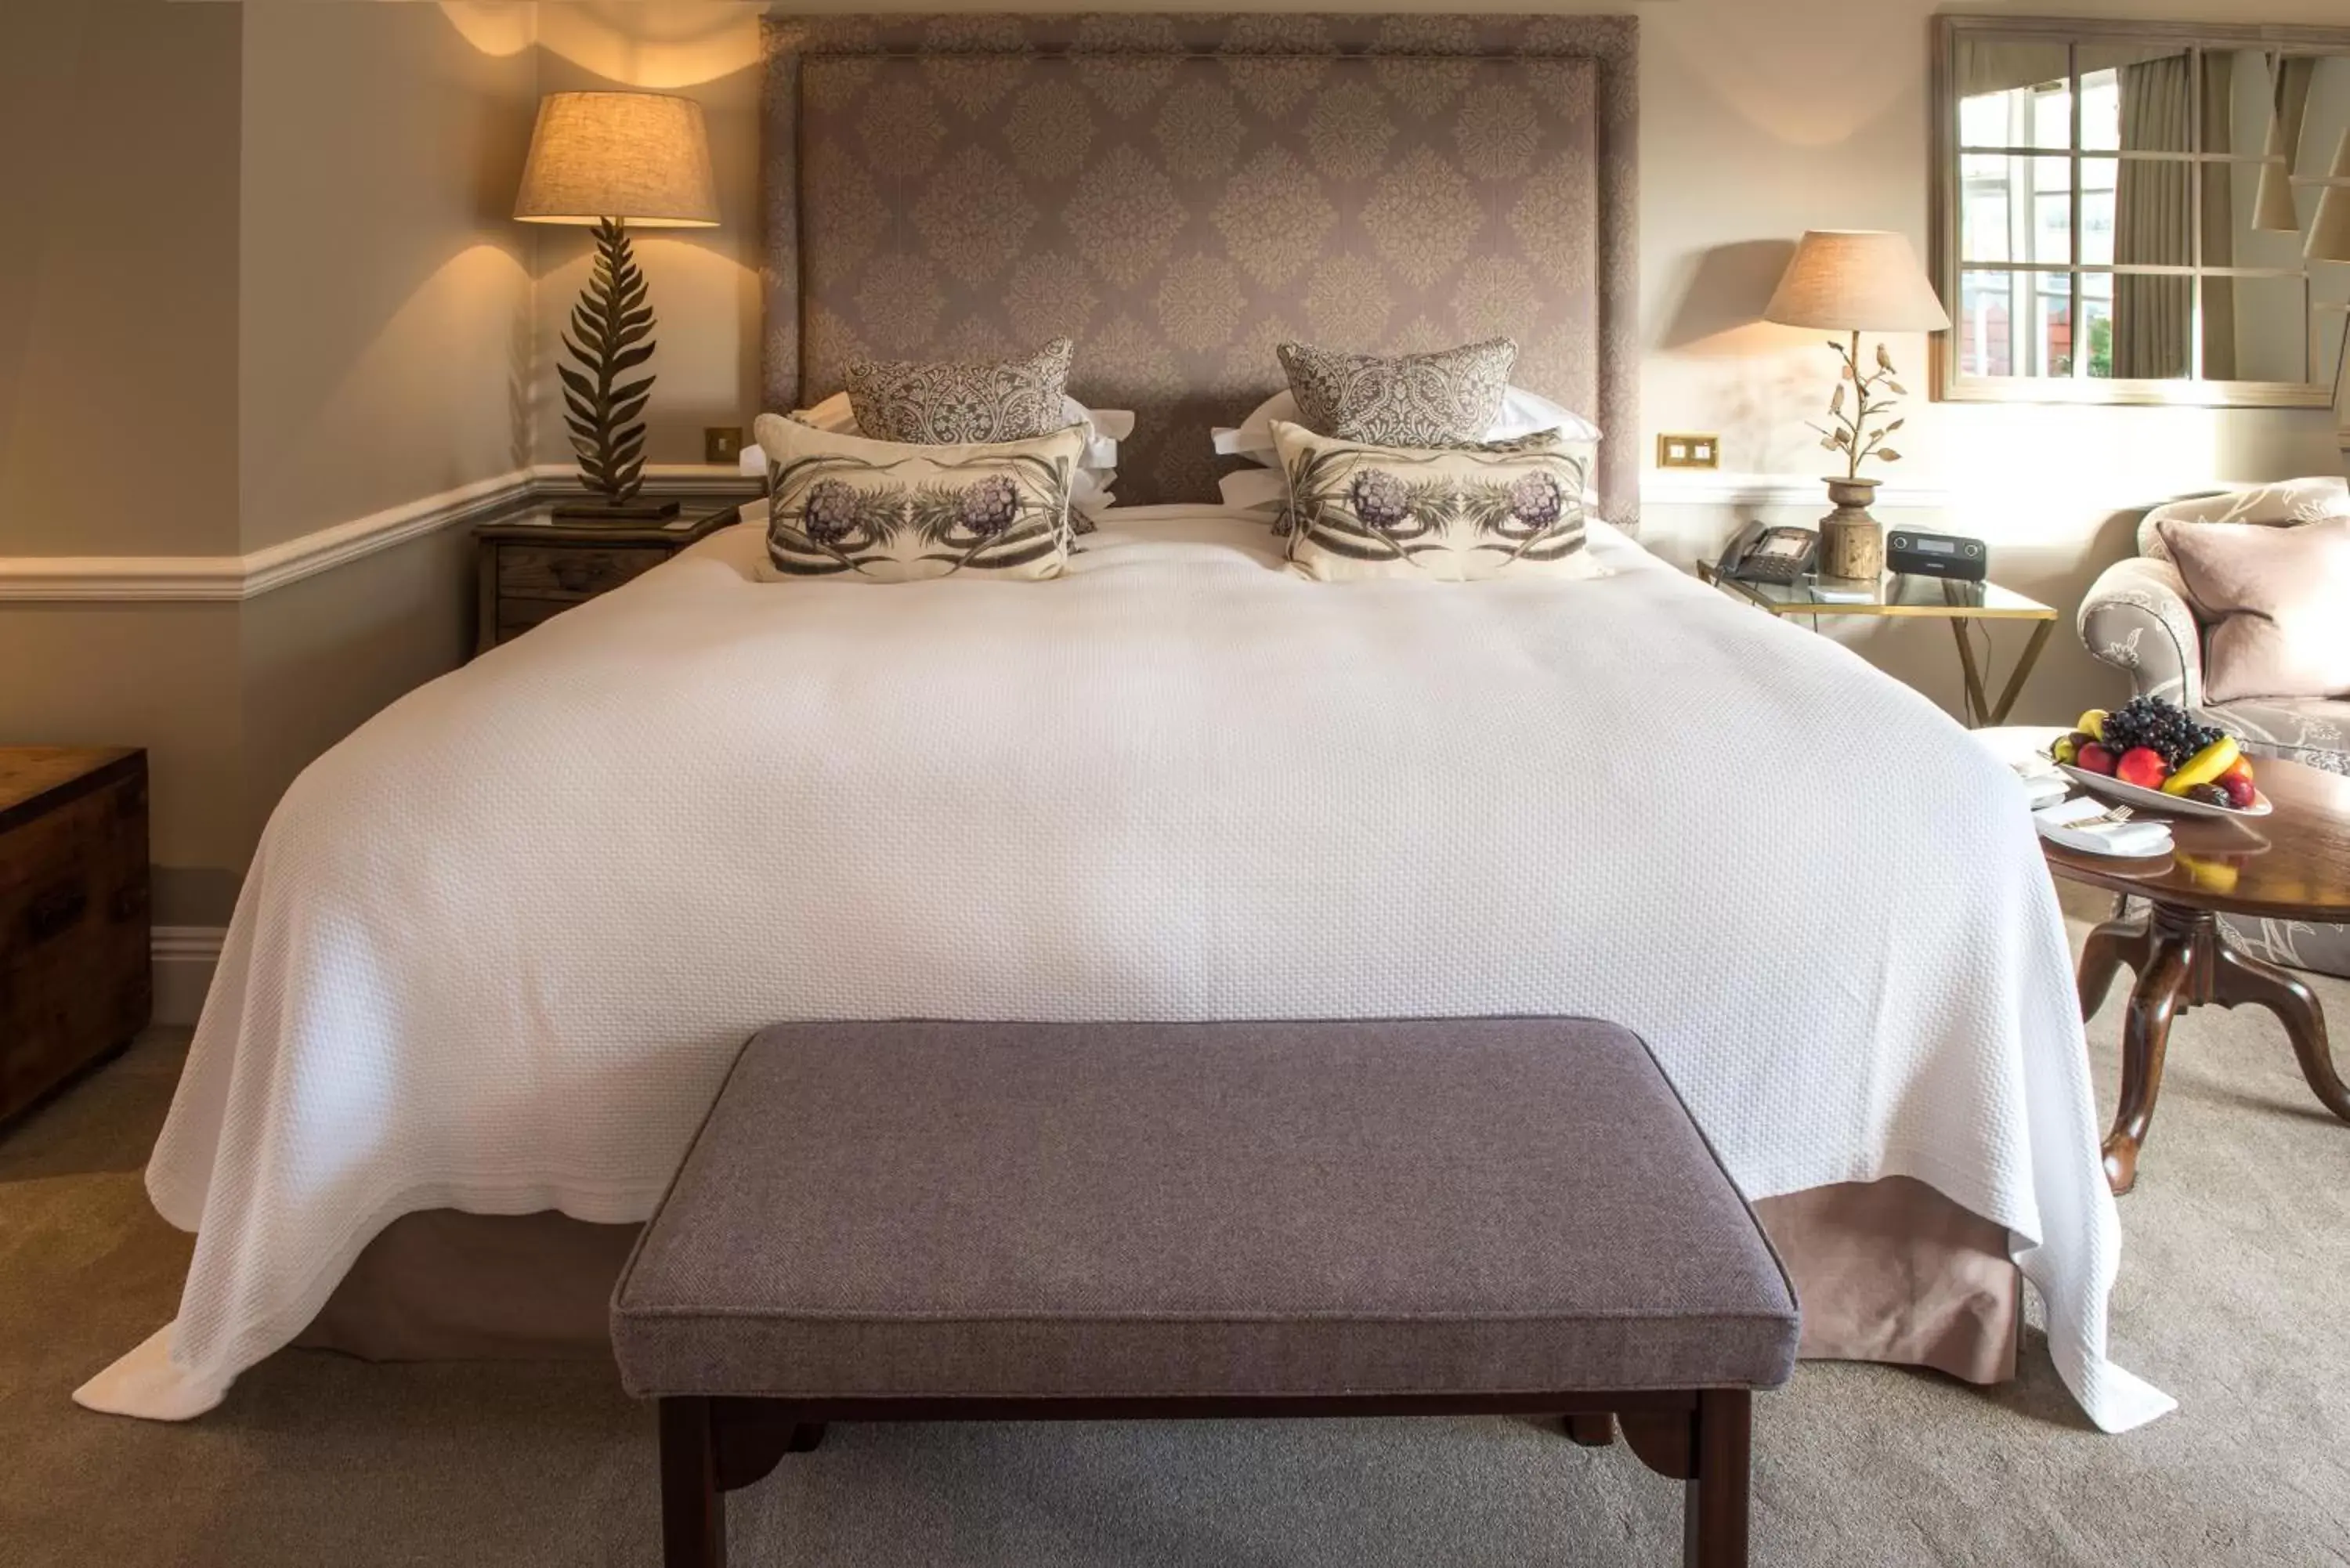 Bed, Room Photo in Chewton Glen Hotel - an Iconic Luxury Hotel